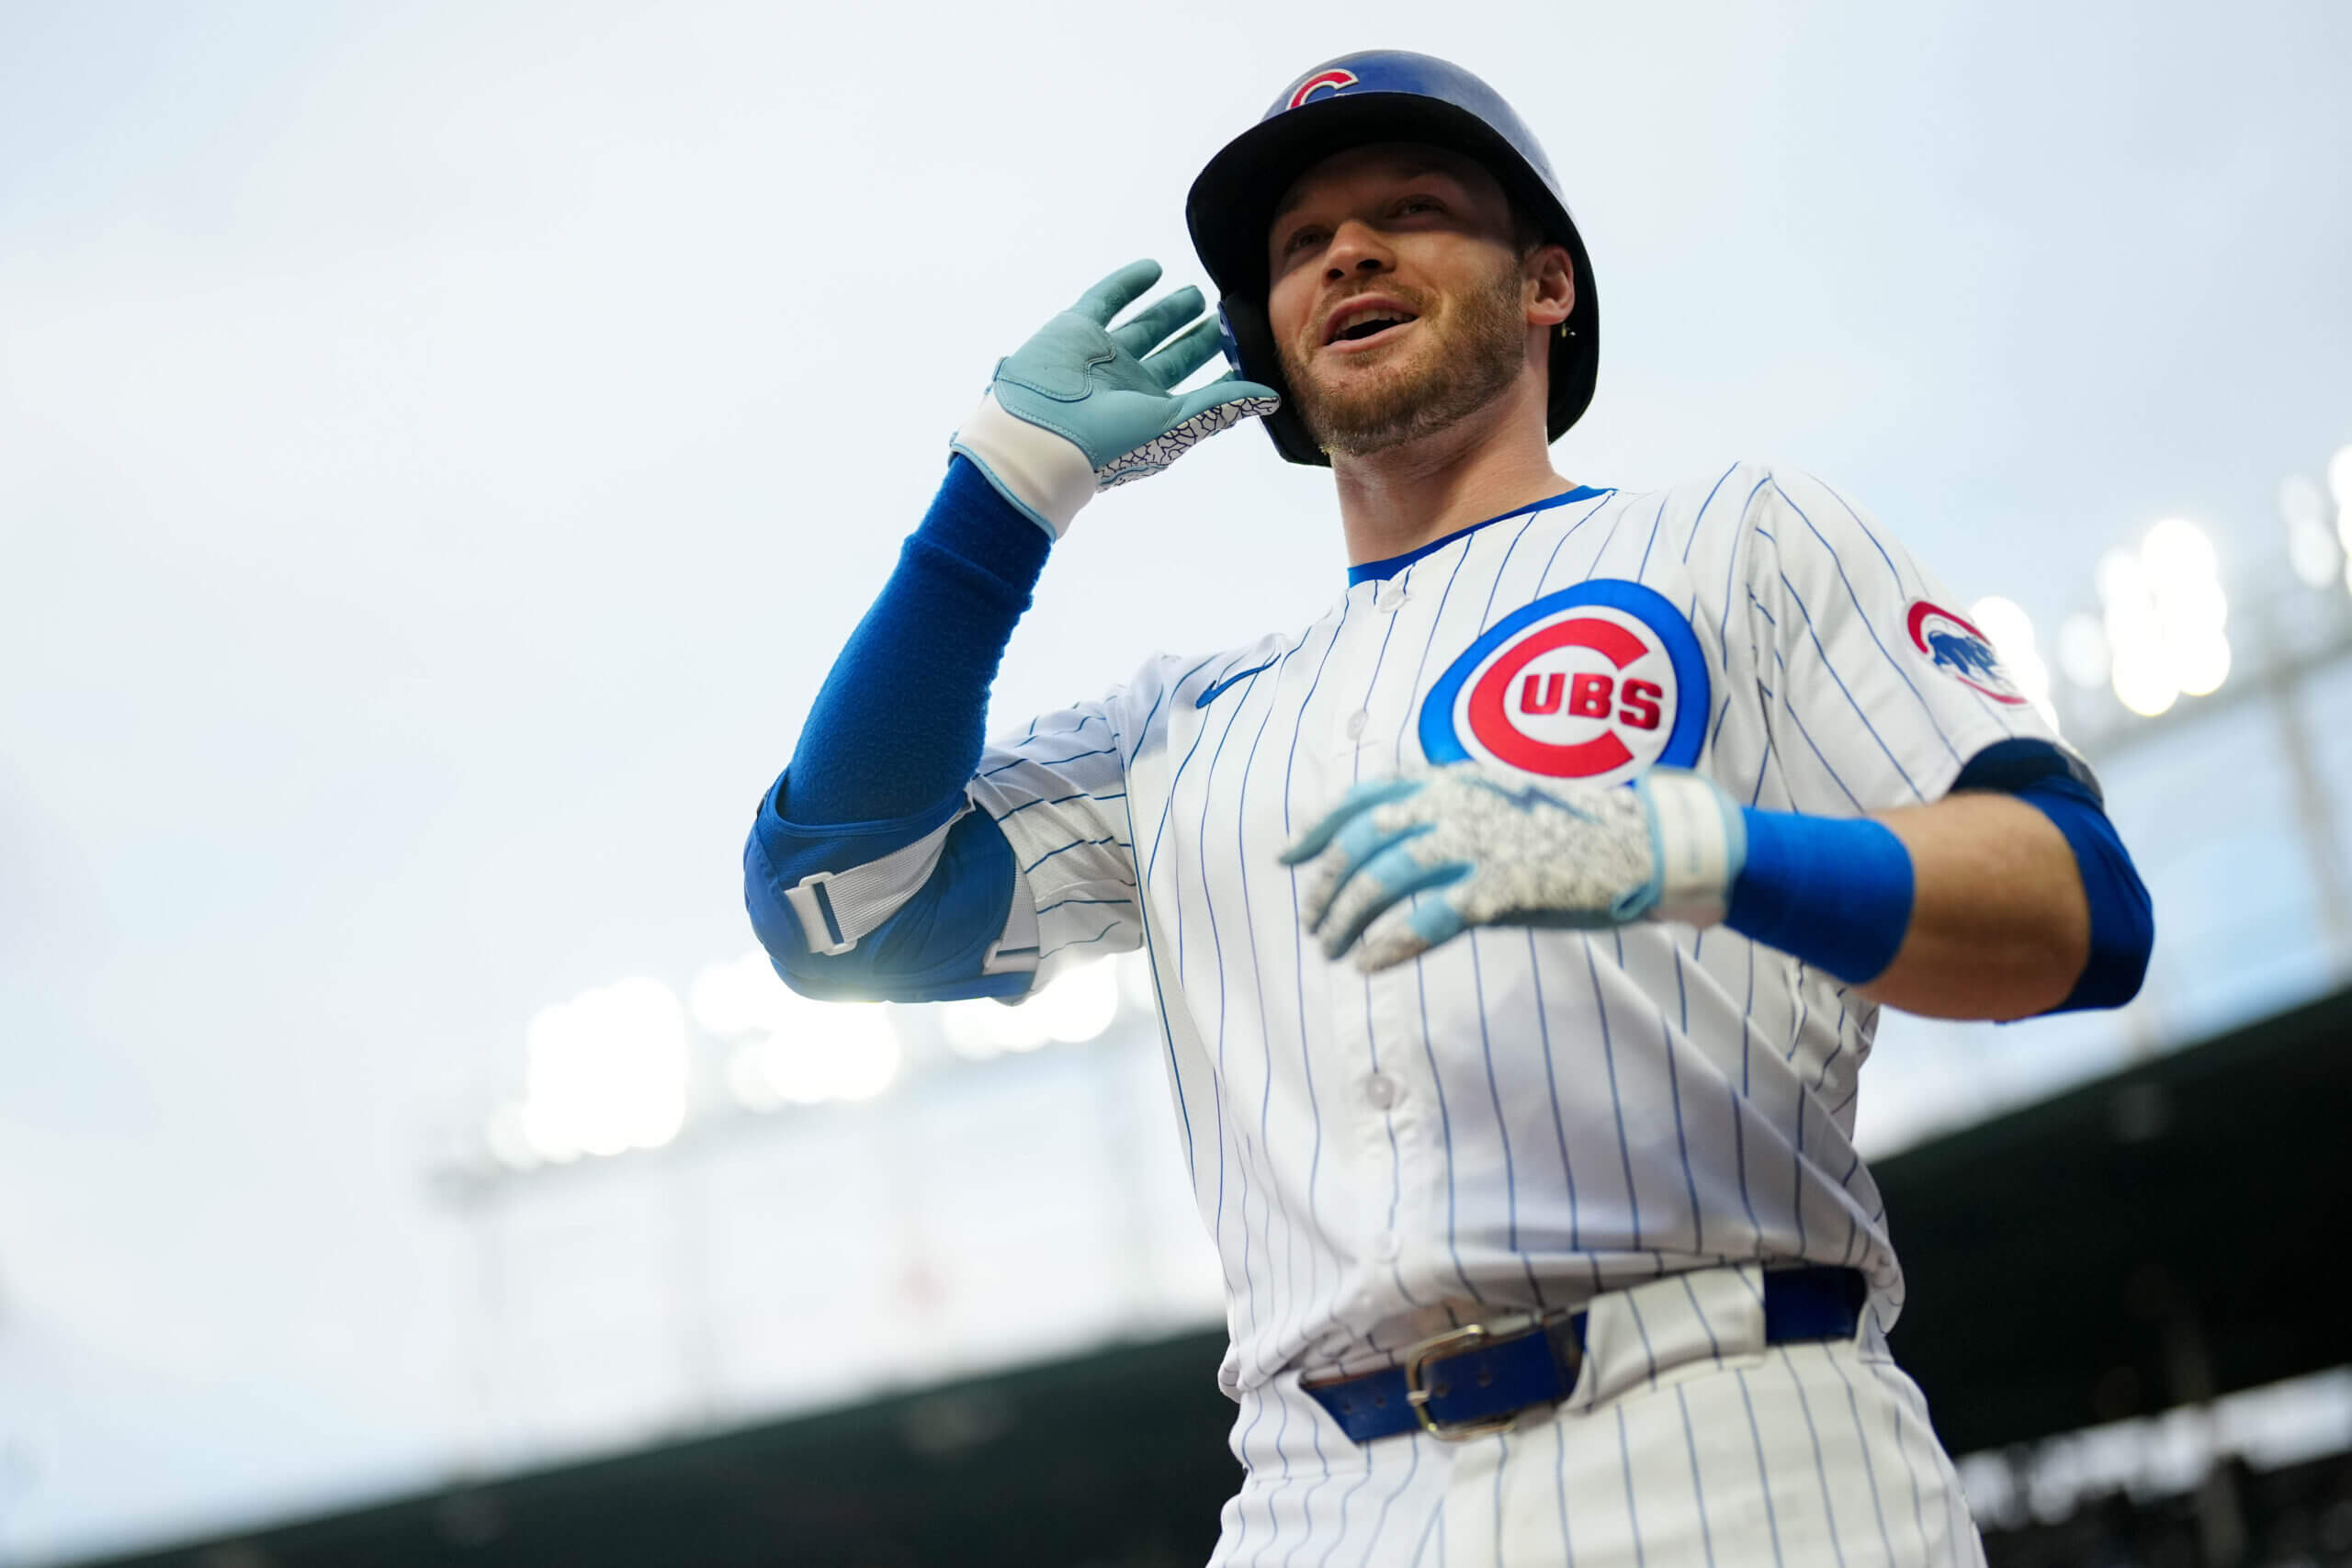 Can a mental break be what helps Cubs' Ian Happ get out of an early season funk?